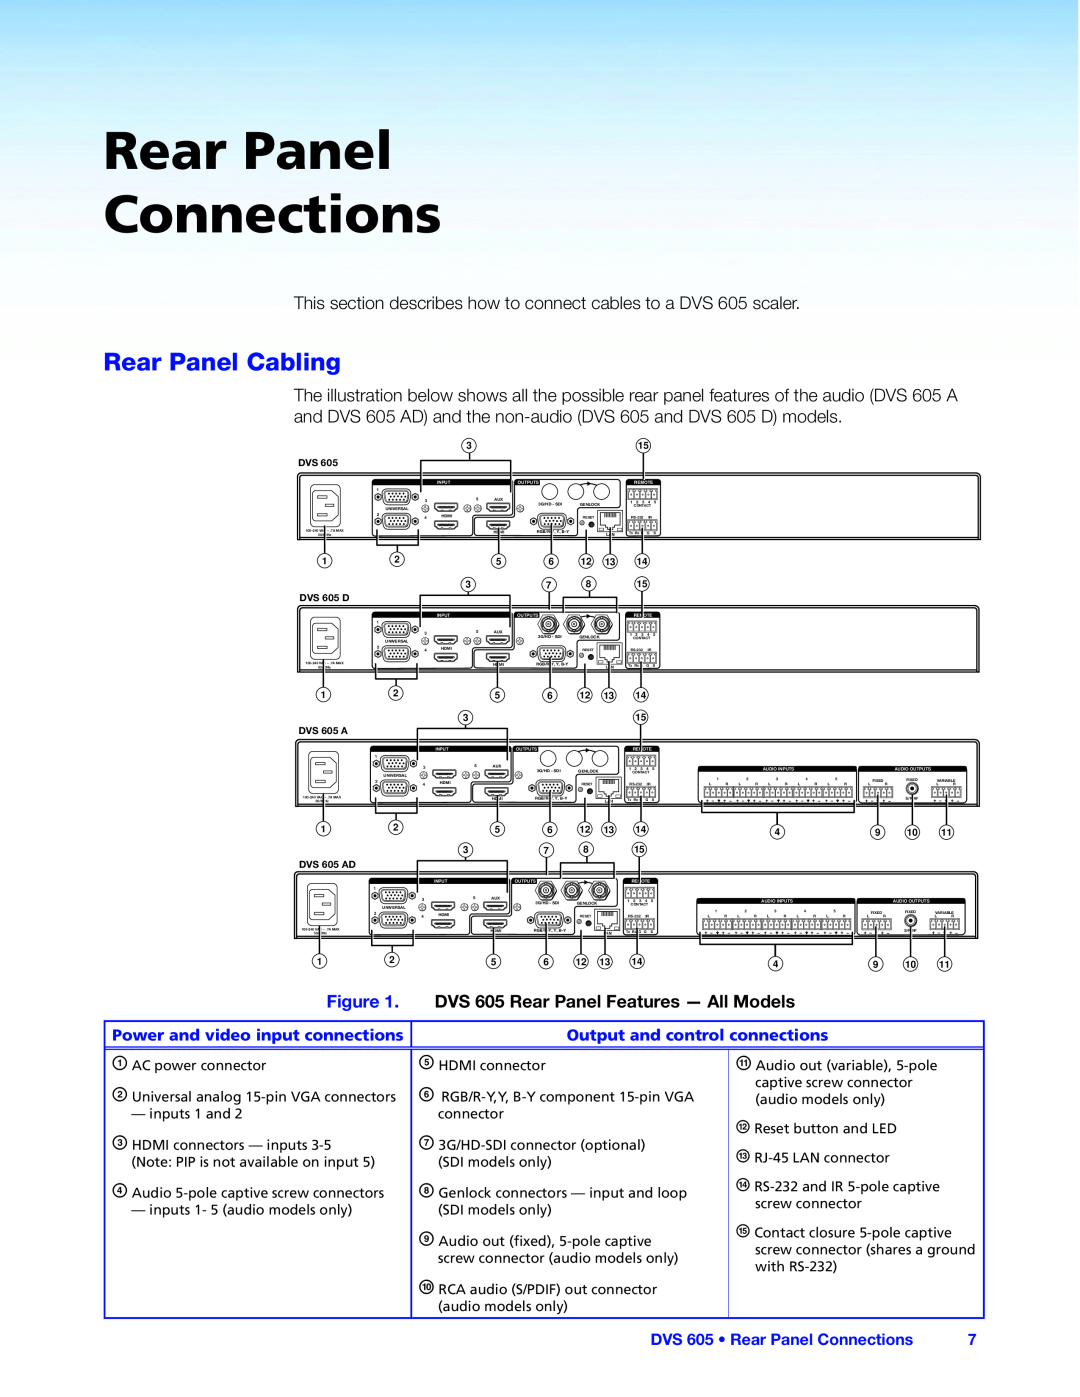 Extron electronic manual Rear Panel Connections, Rear Panel Cabling, Figure, DVS 605 Rear Panel Features — All Models 